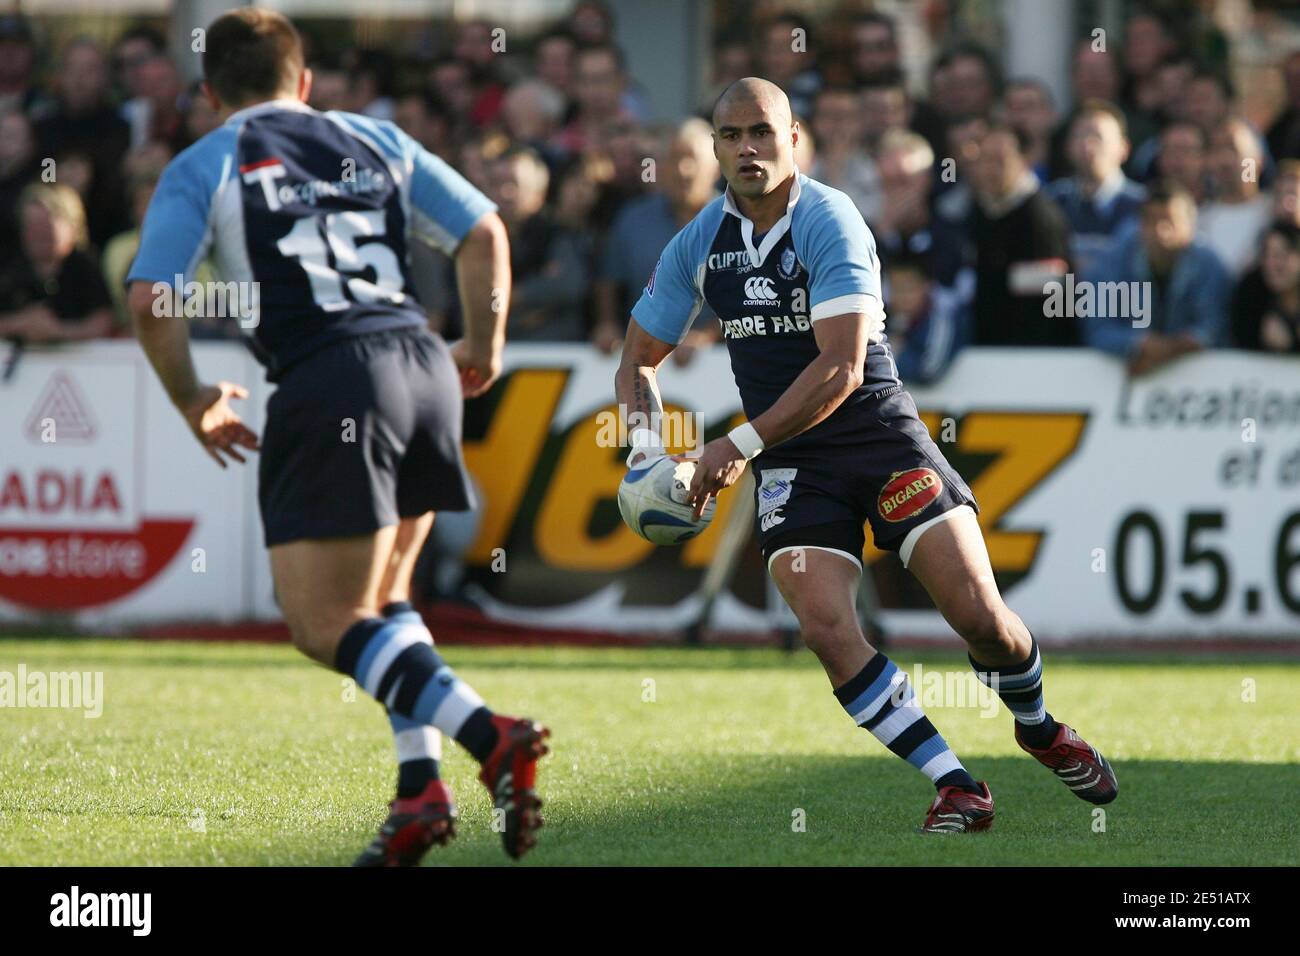 Castres' Loaloa Milford during the French Top 14 Rugby match, Stade  Toulousain vs Castres Olympique at the Pierre Antoine stadium in Castres,  France on May 7, 2008. Toulouse won 16-6. Photo by